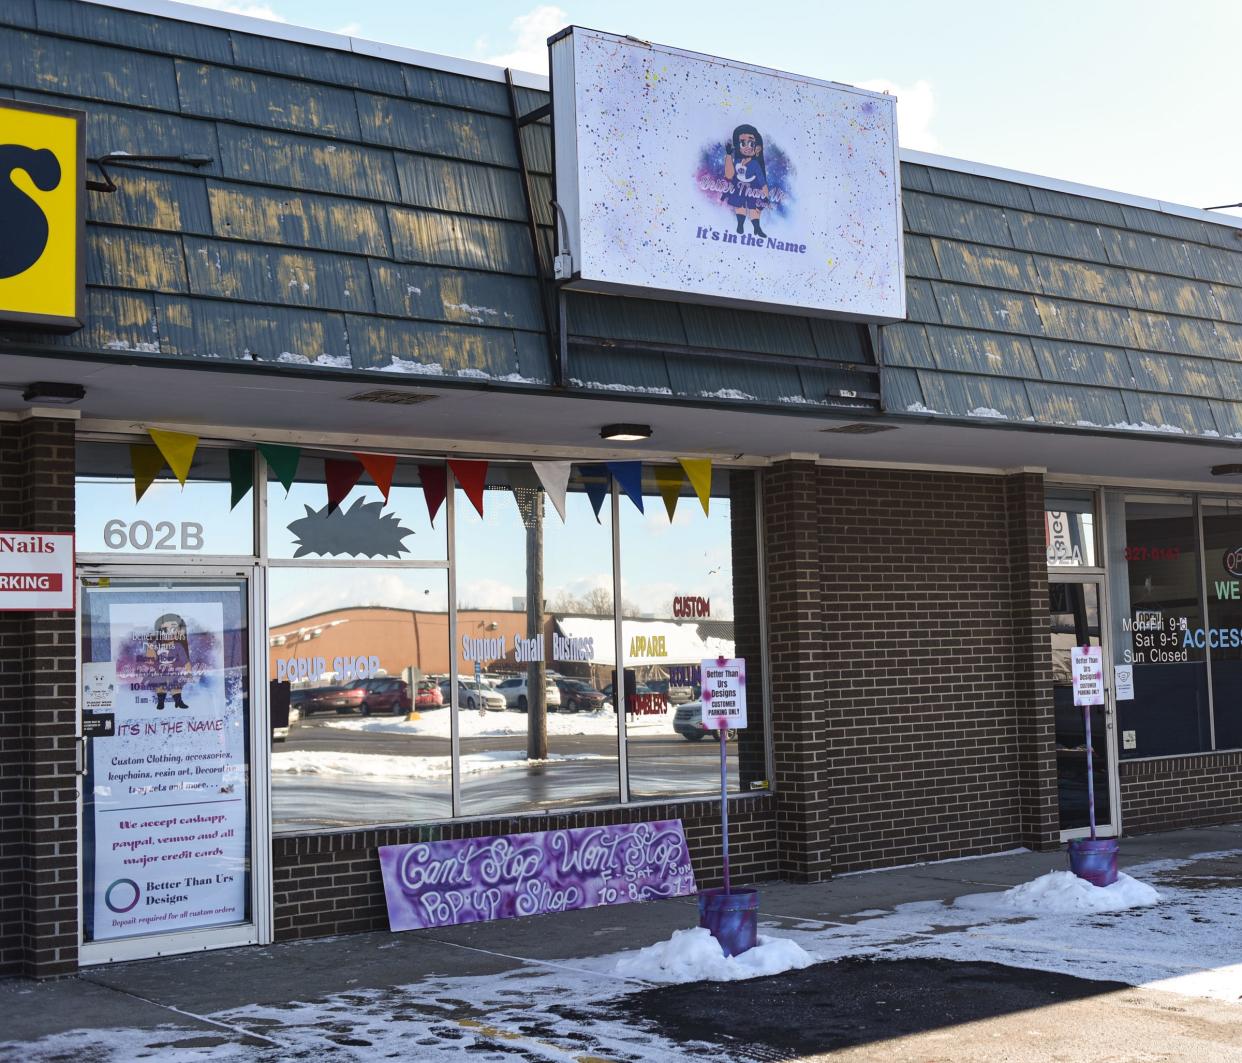 Better Than Ur's Designs in Delta Township, pictured Friday, Jan. 7, 2022. The store features pop-up shops on the weekends.